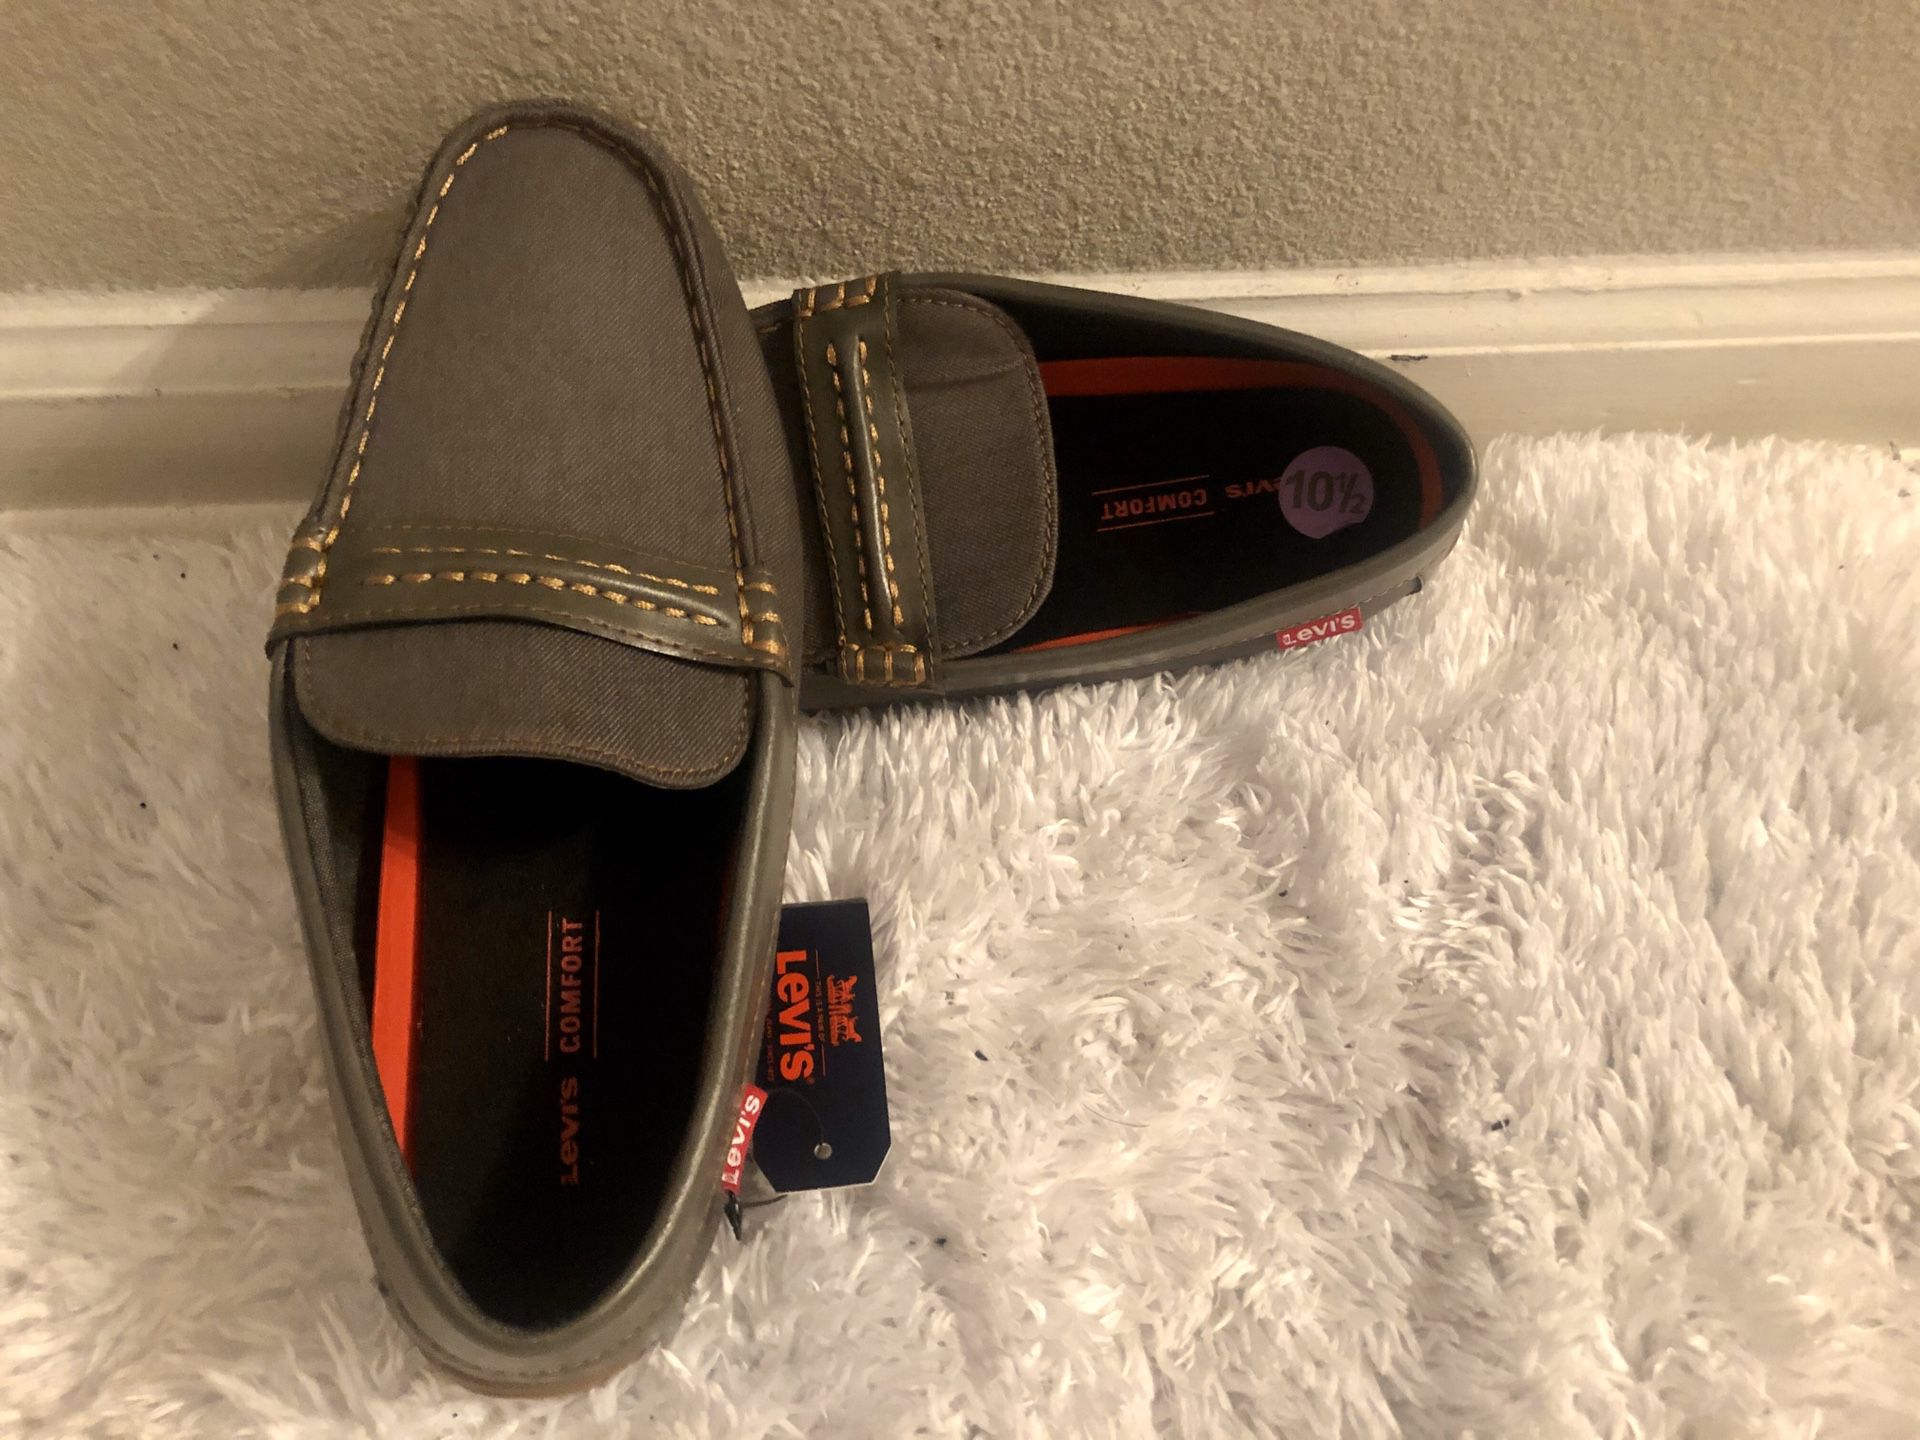 Levi's Brand Loafers/Slip-on Shoes - Size 10